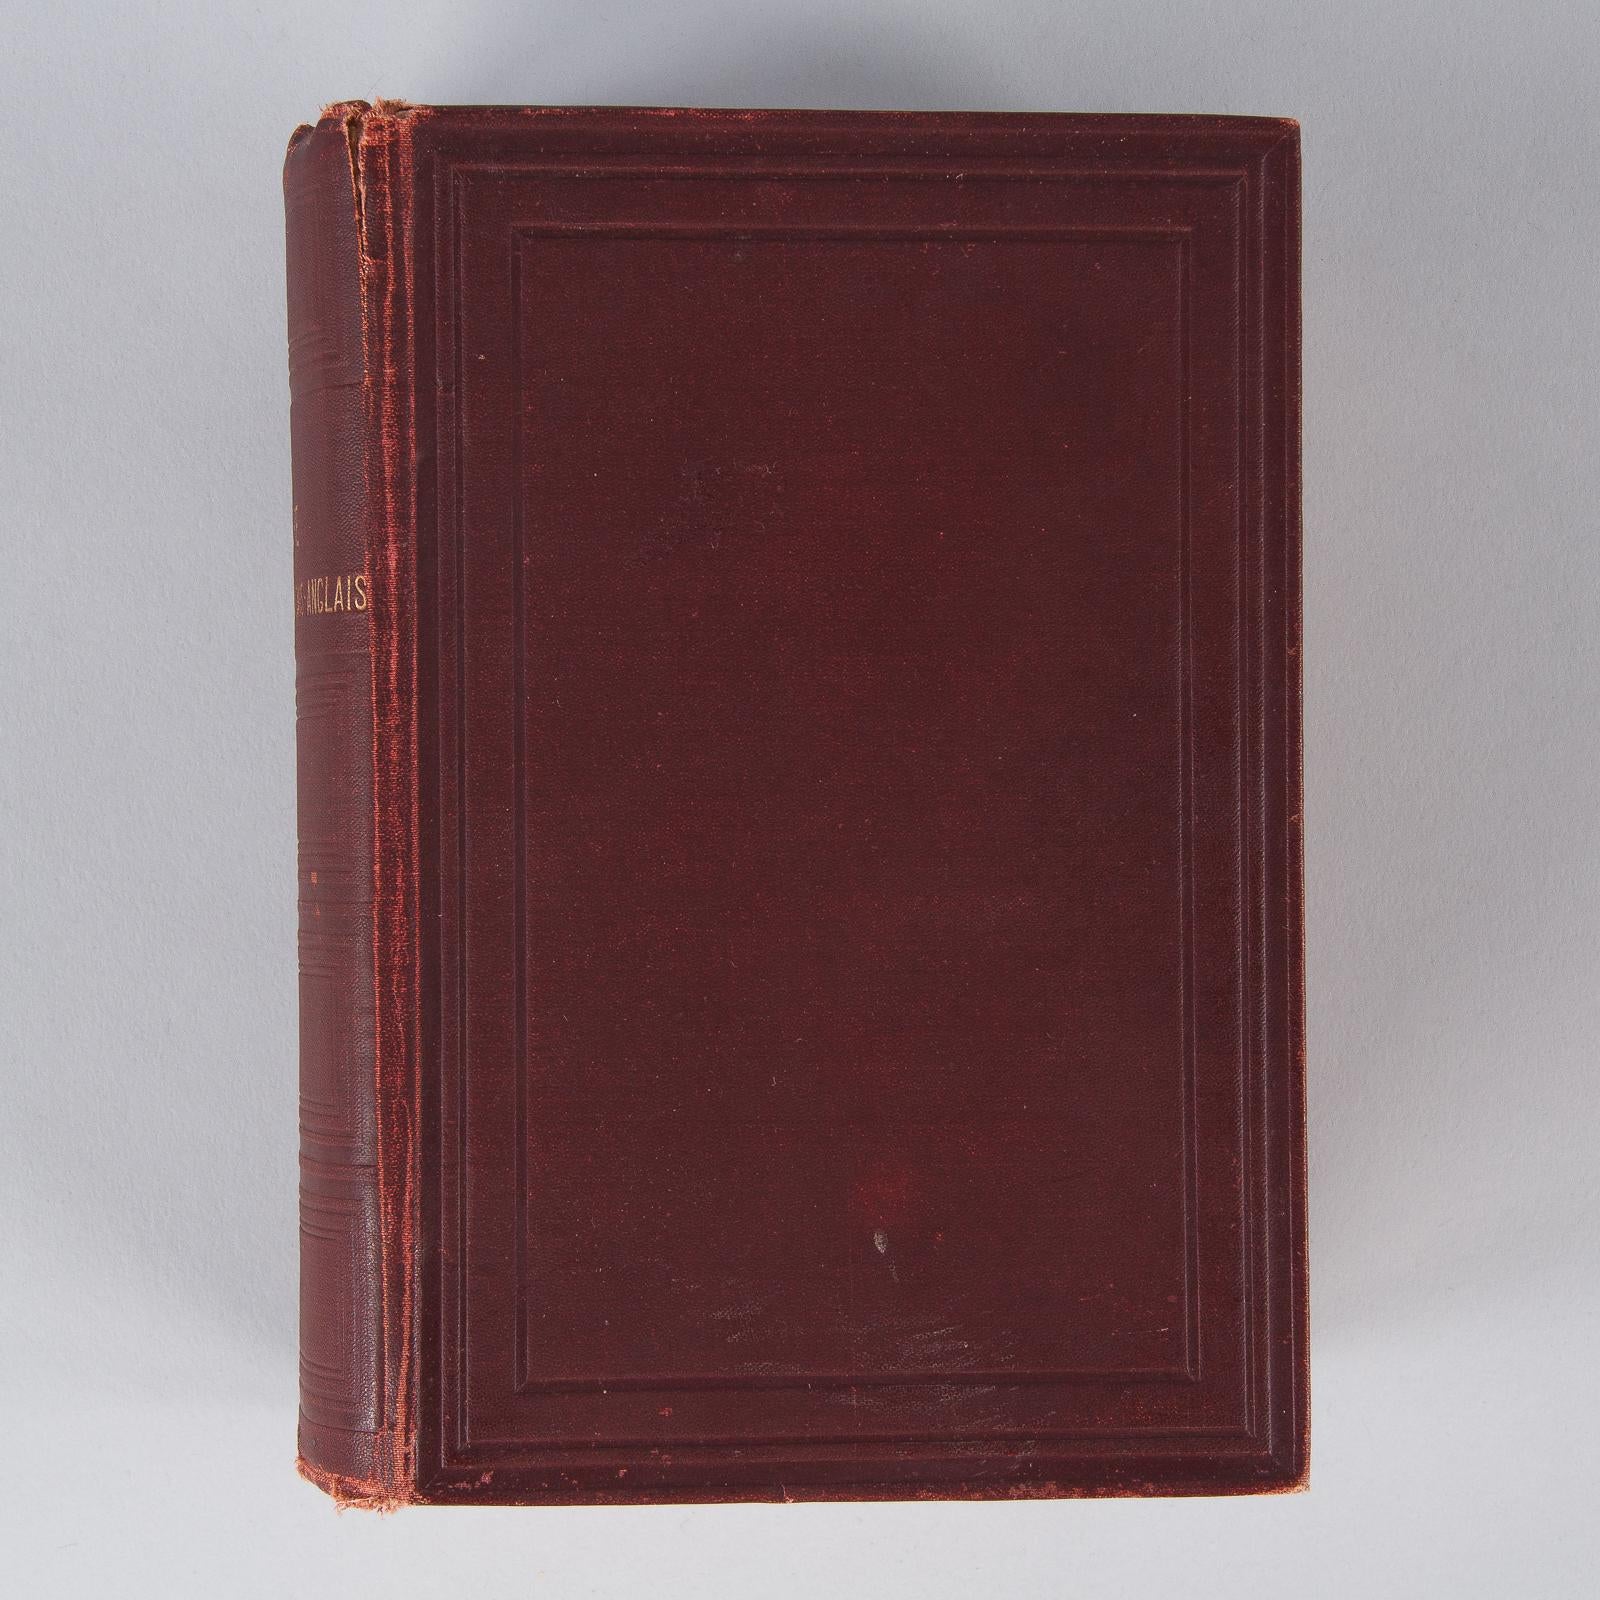 Leather French Book-Dictionnaire Anglais-Francais by Alfred Elwall, 1901